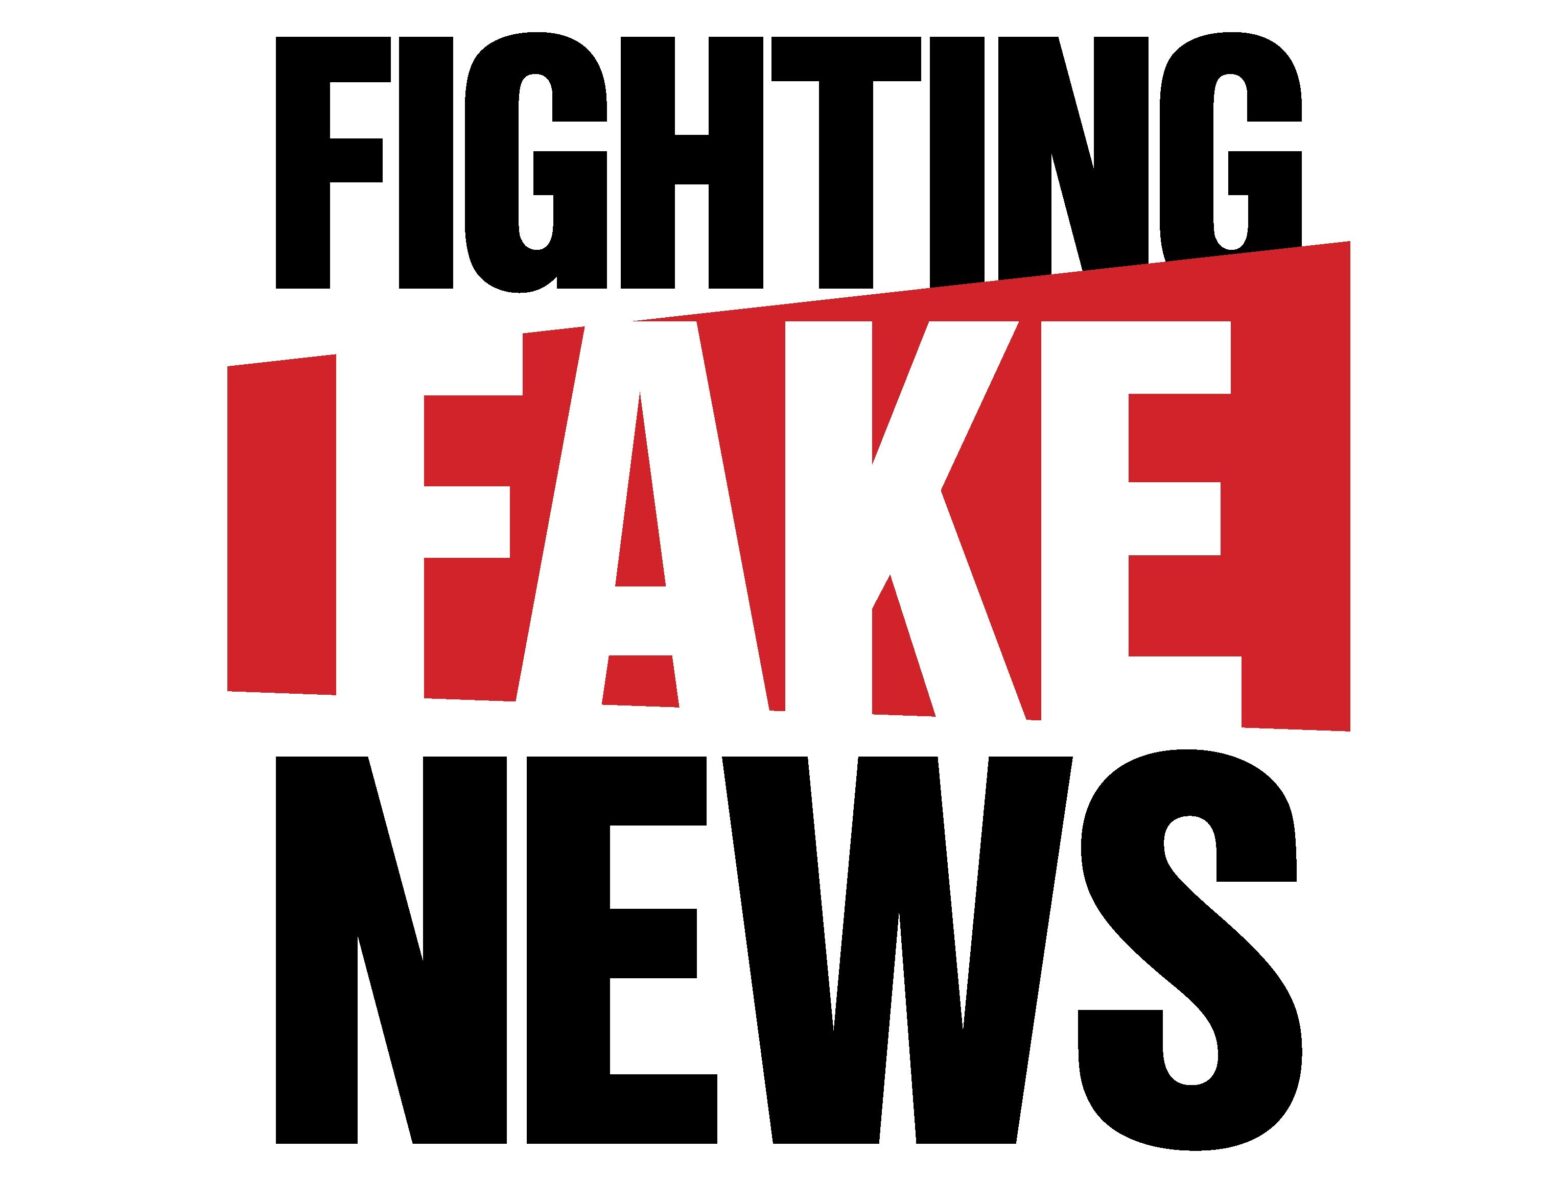 Fake Fakier And Fakiest The Fake News Pandemic The New Normal To Denting Public Reputation 